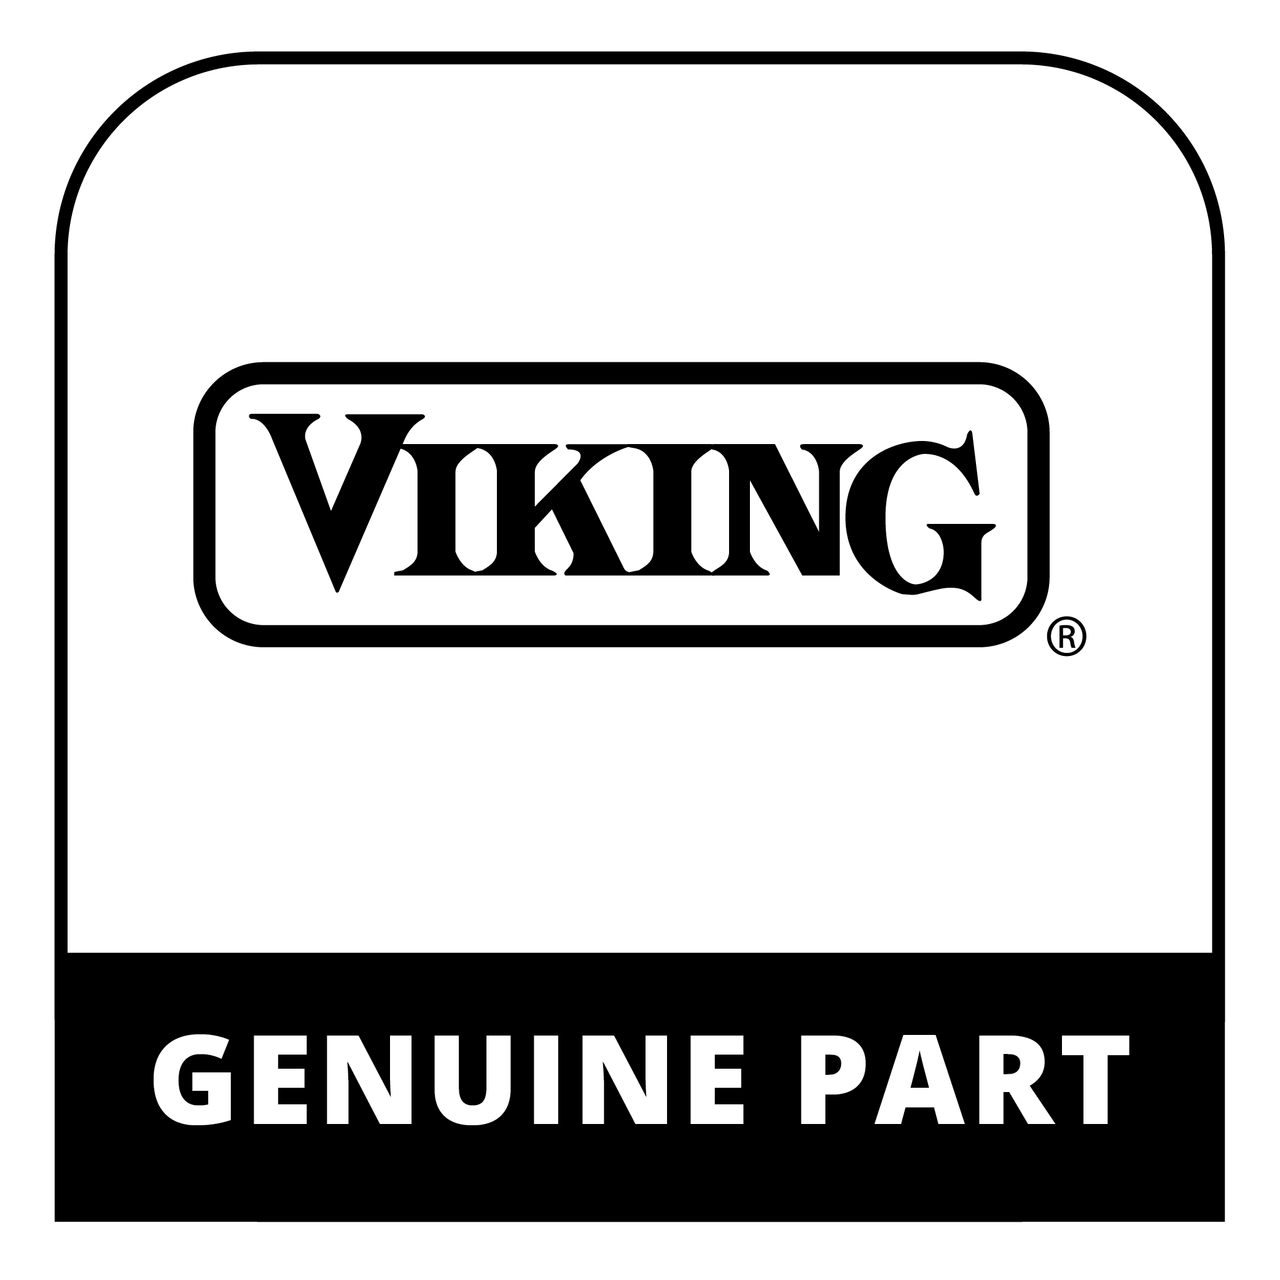 Viking PS500024SG - 30" SELECT TOUCH SINGLE CONTRO - Genuine Viking Part